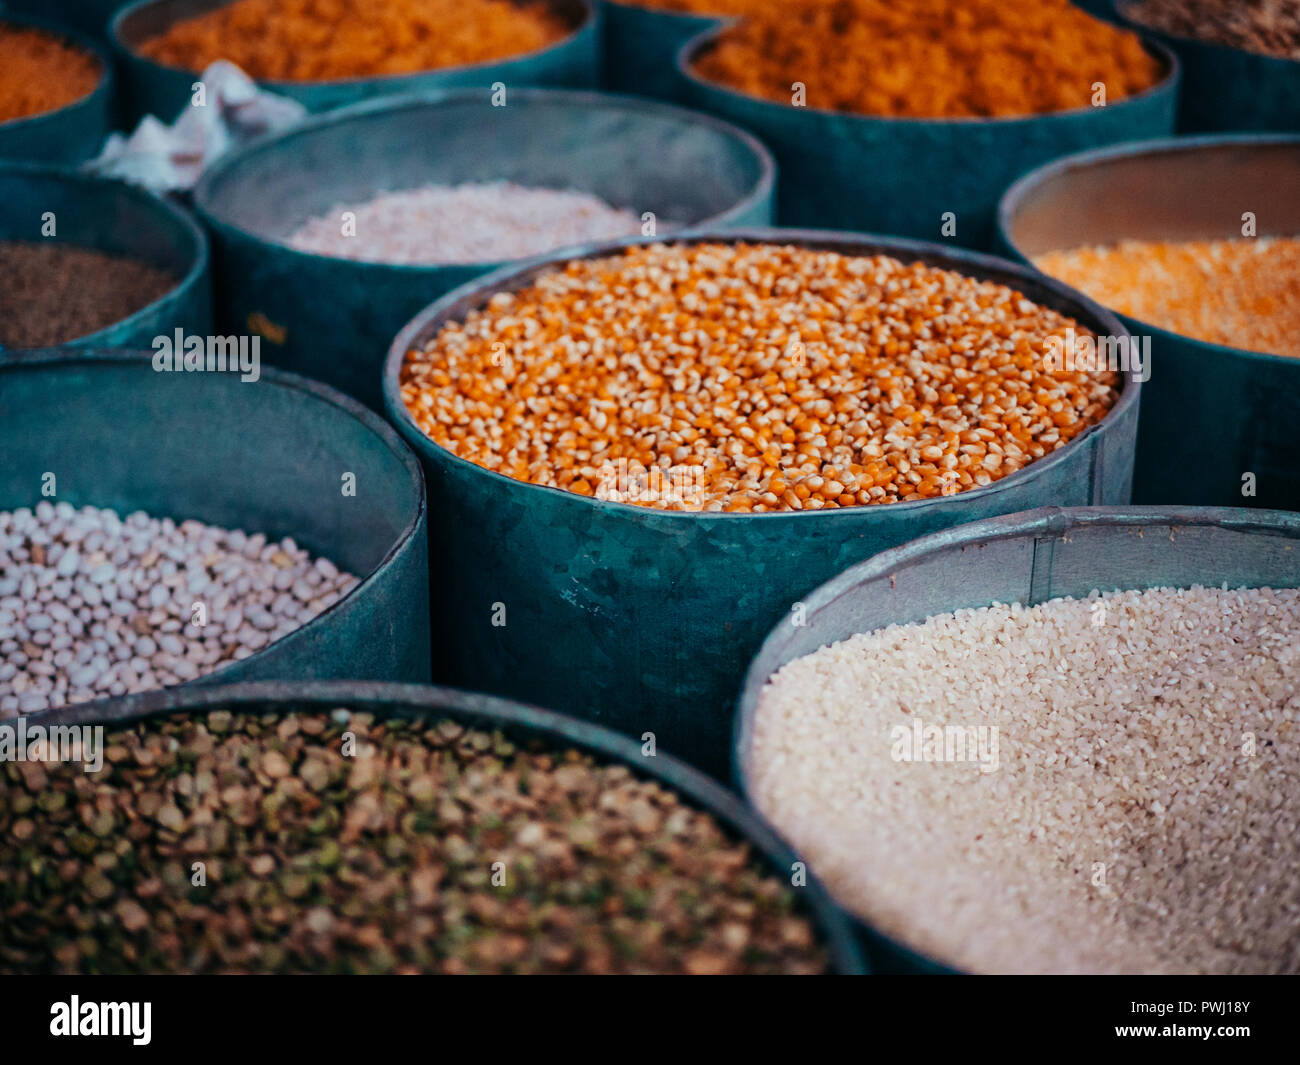 Moroccan food shop on a Market with corn, rice, peas and other grain Stock Photo